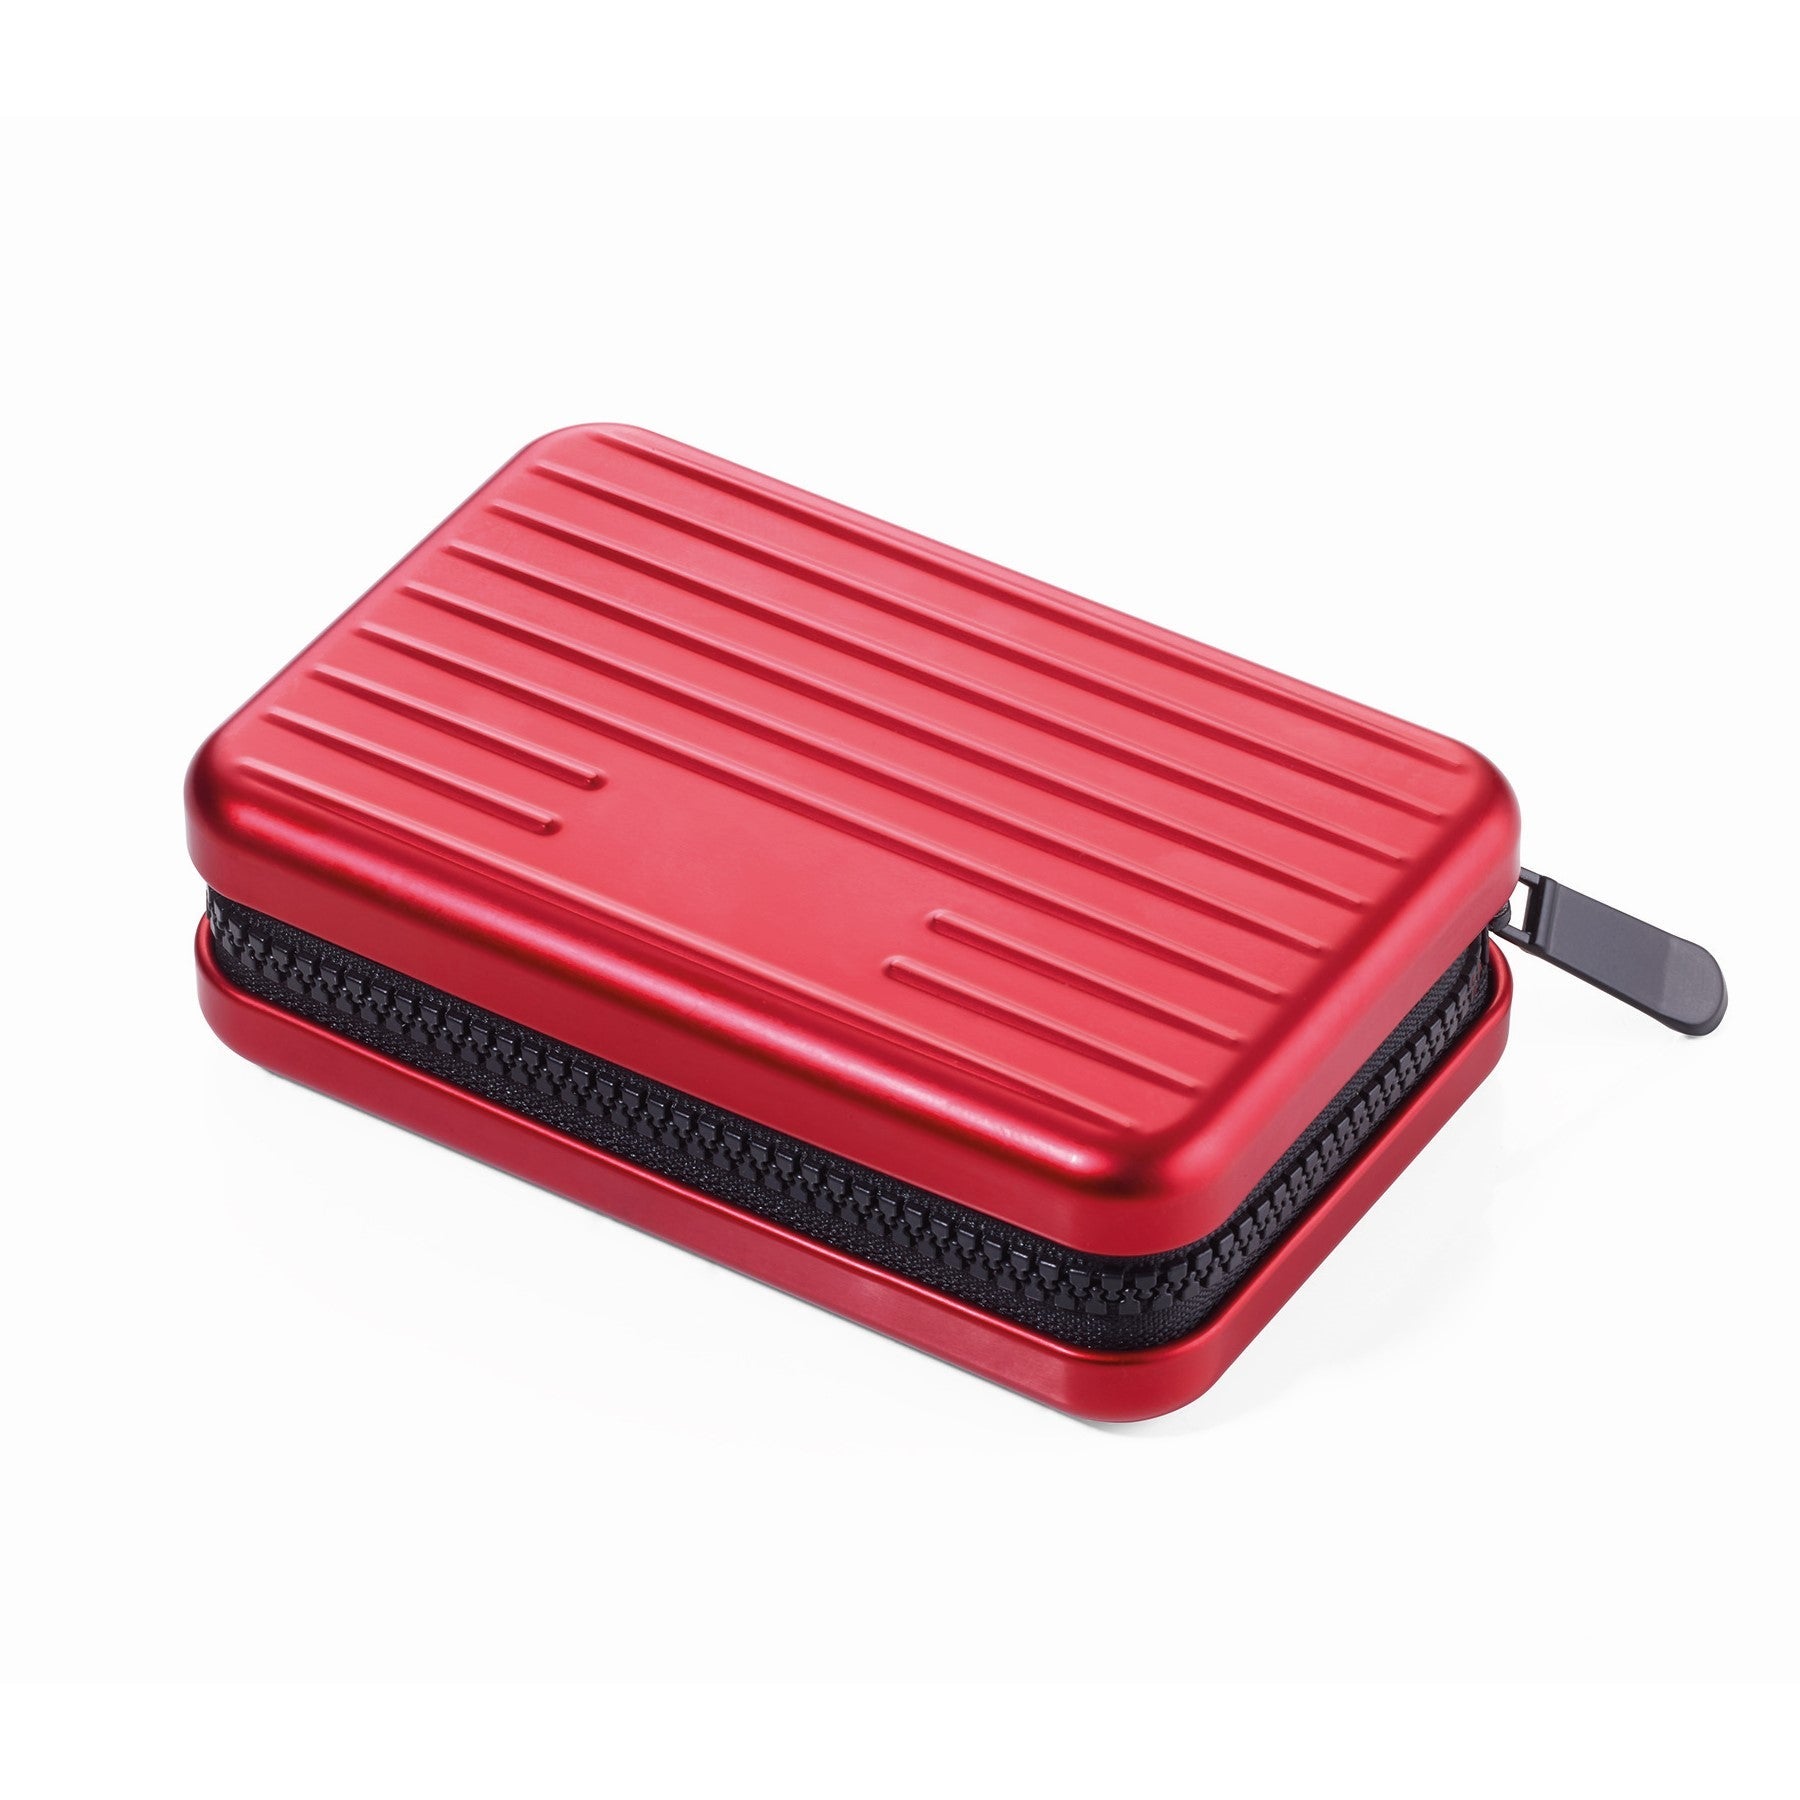 TROIKA Credit Card Case: Hard-Shell RFID Fraud Blocking CARD CASE Red